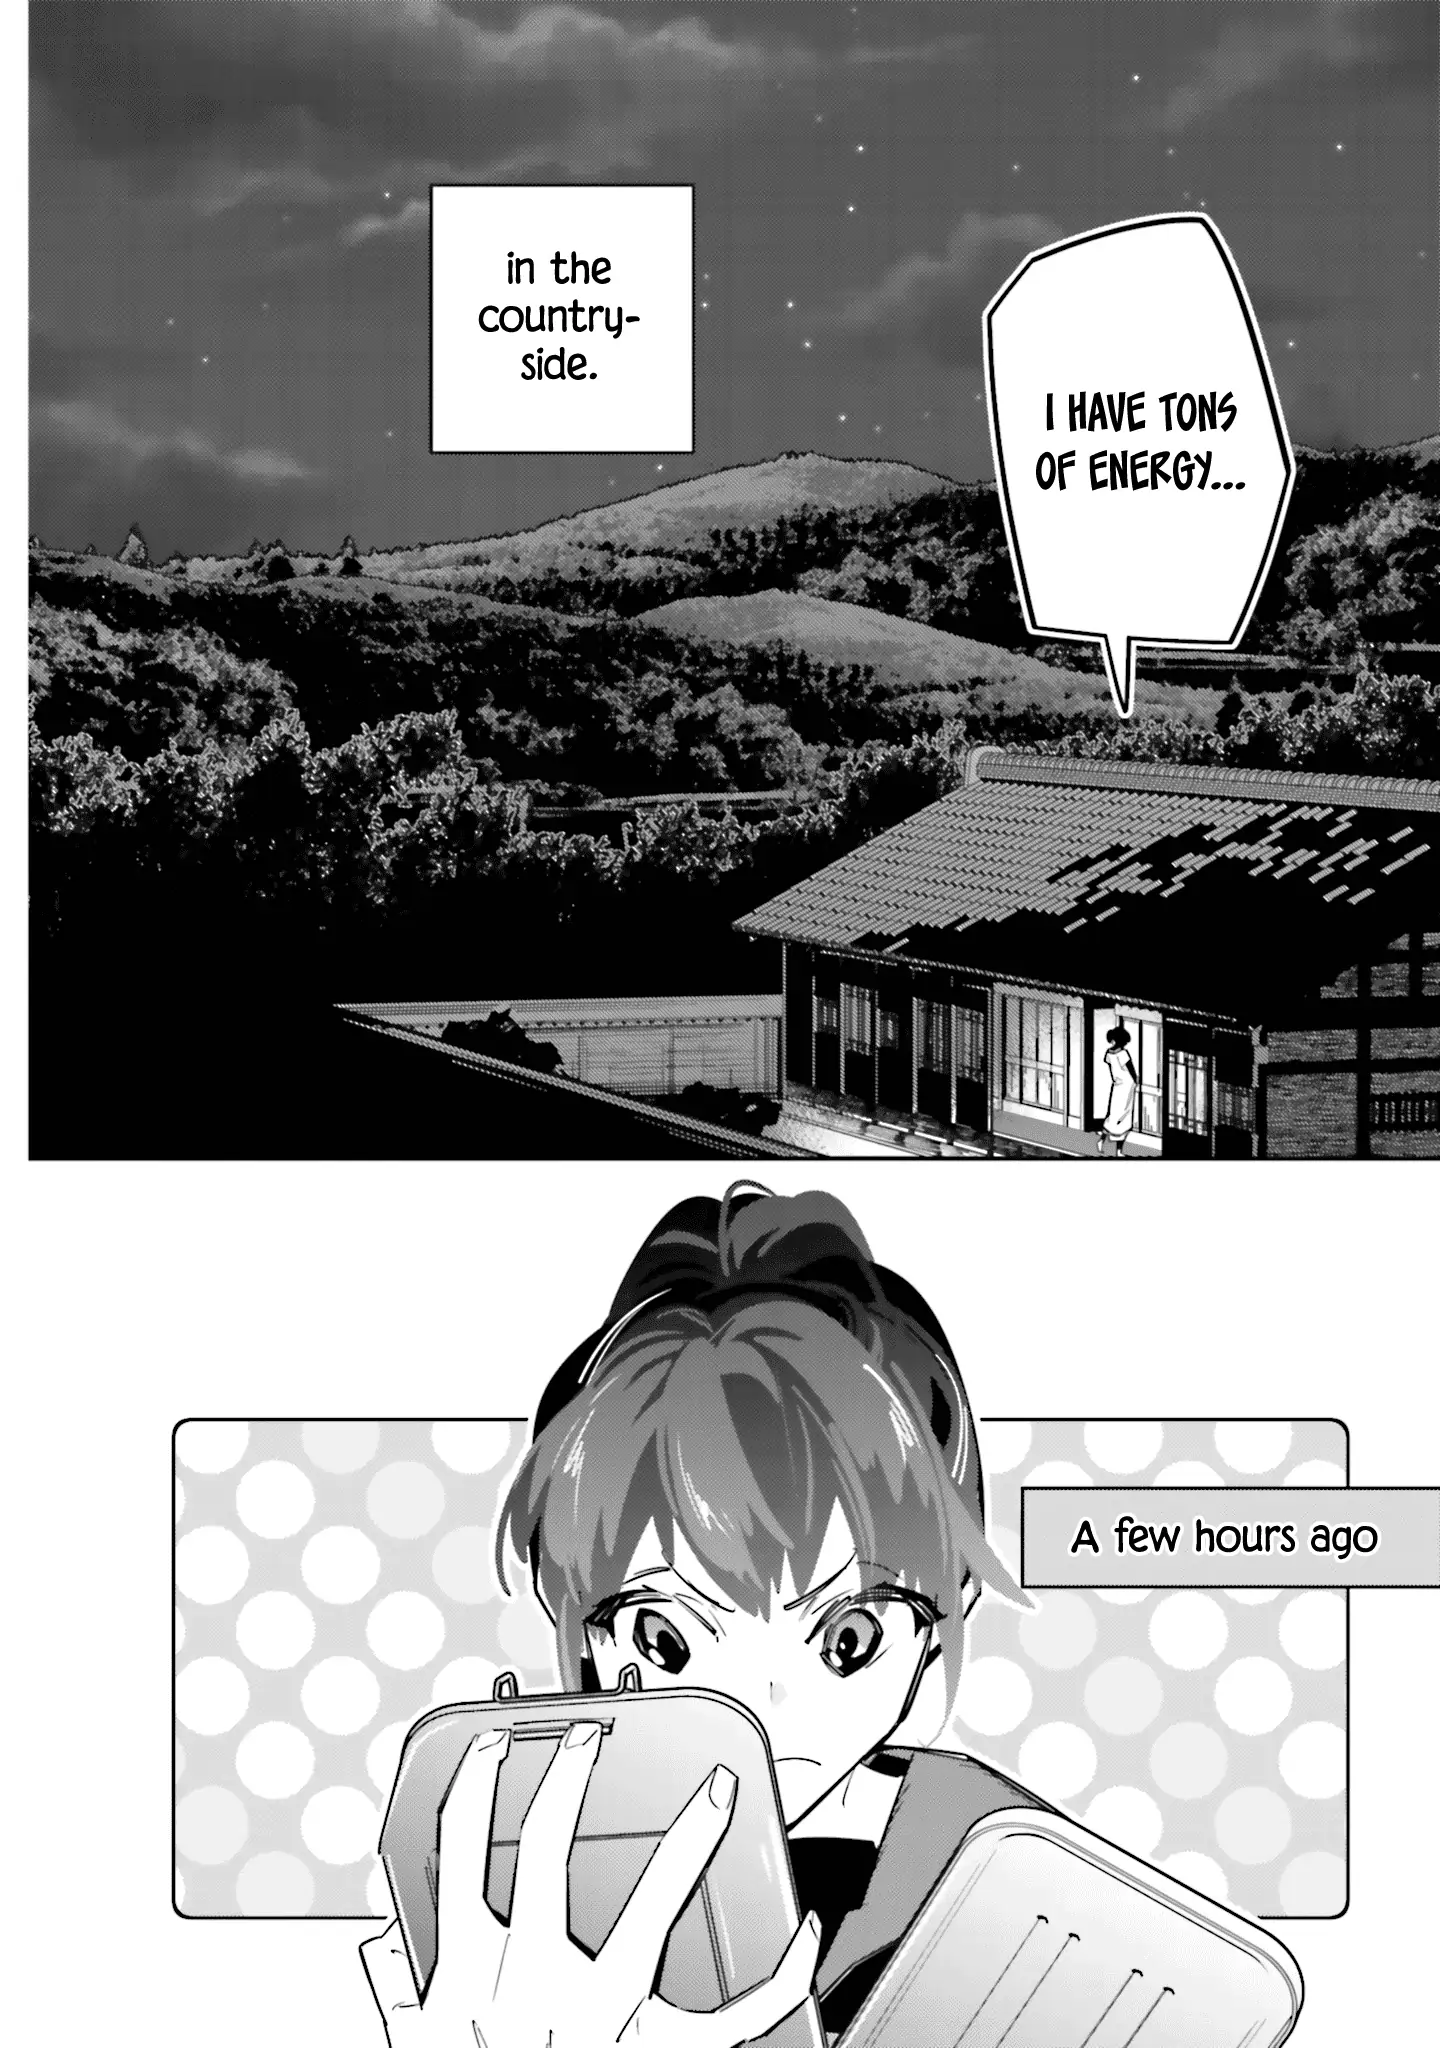 I Reincarnated As The Little Sister Of A Death Game Manga's Murder Mastermind And Failed - chapter 3 - #2